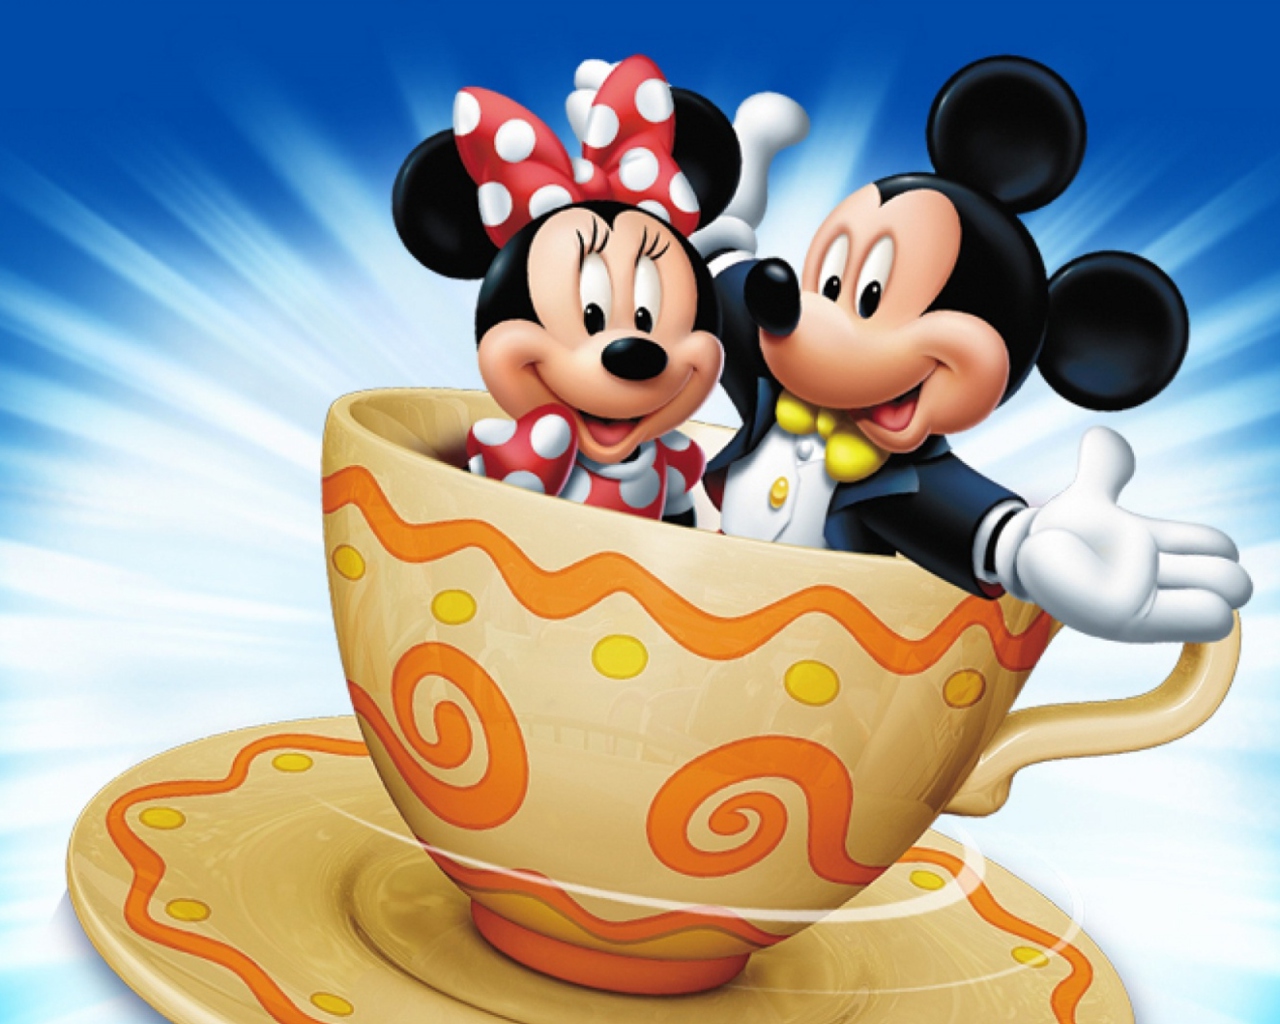 Mickey And Minnie Mouse In Cup screenshot #1 1280x1024